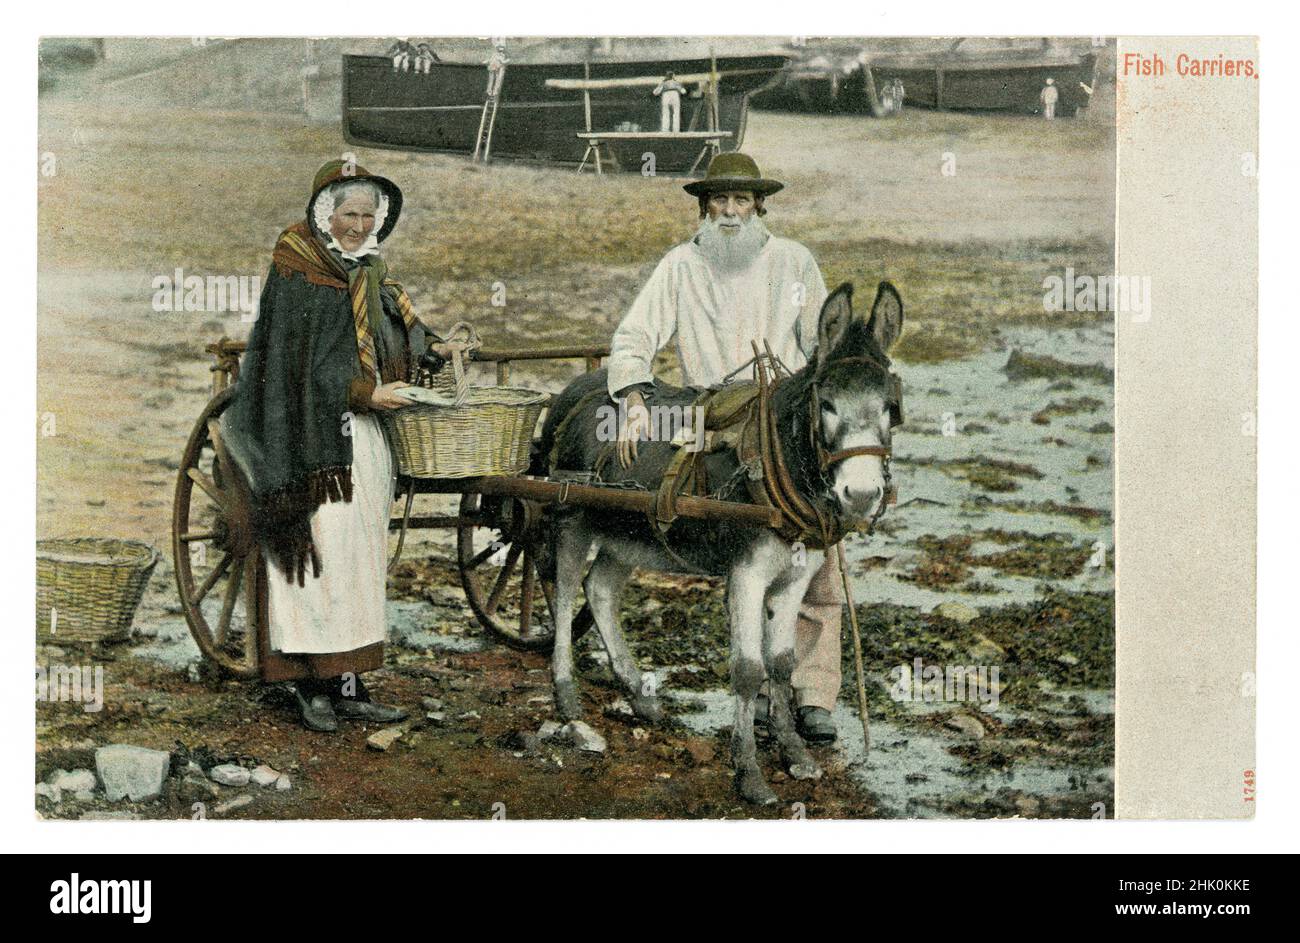 Original Edwardian era tinted greetings souvenir postcard of Cornish Fish Carriers, fishwife, with donkey cart on the waterfront, Newlyn harbour, Cornwall, U.K. The man is a local called Billy Renfree and his fishwife is filling up her basket with fish. She wears a traditional shawl and apron known as ‘towsers’, dated to 1906 from a posted postcard. Stock Photo